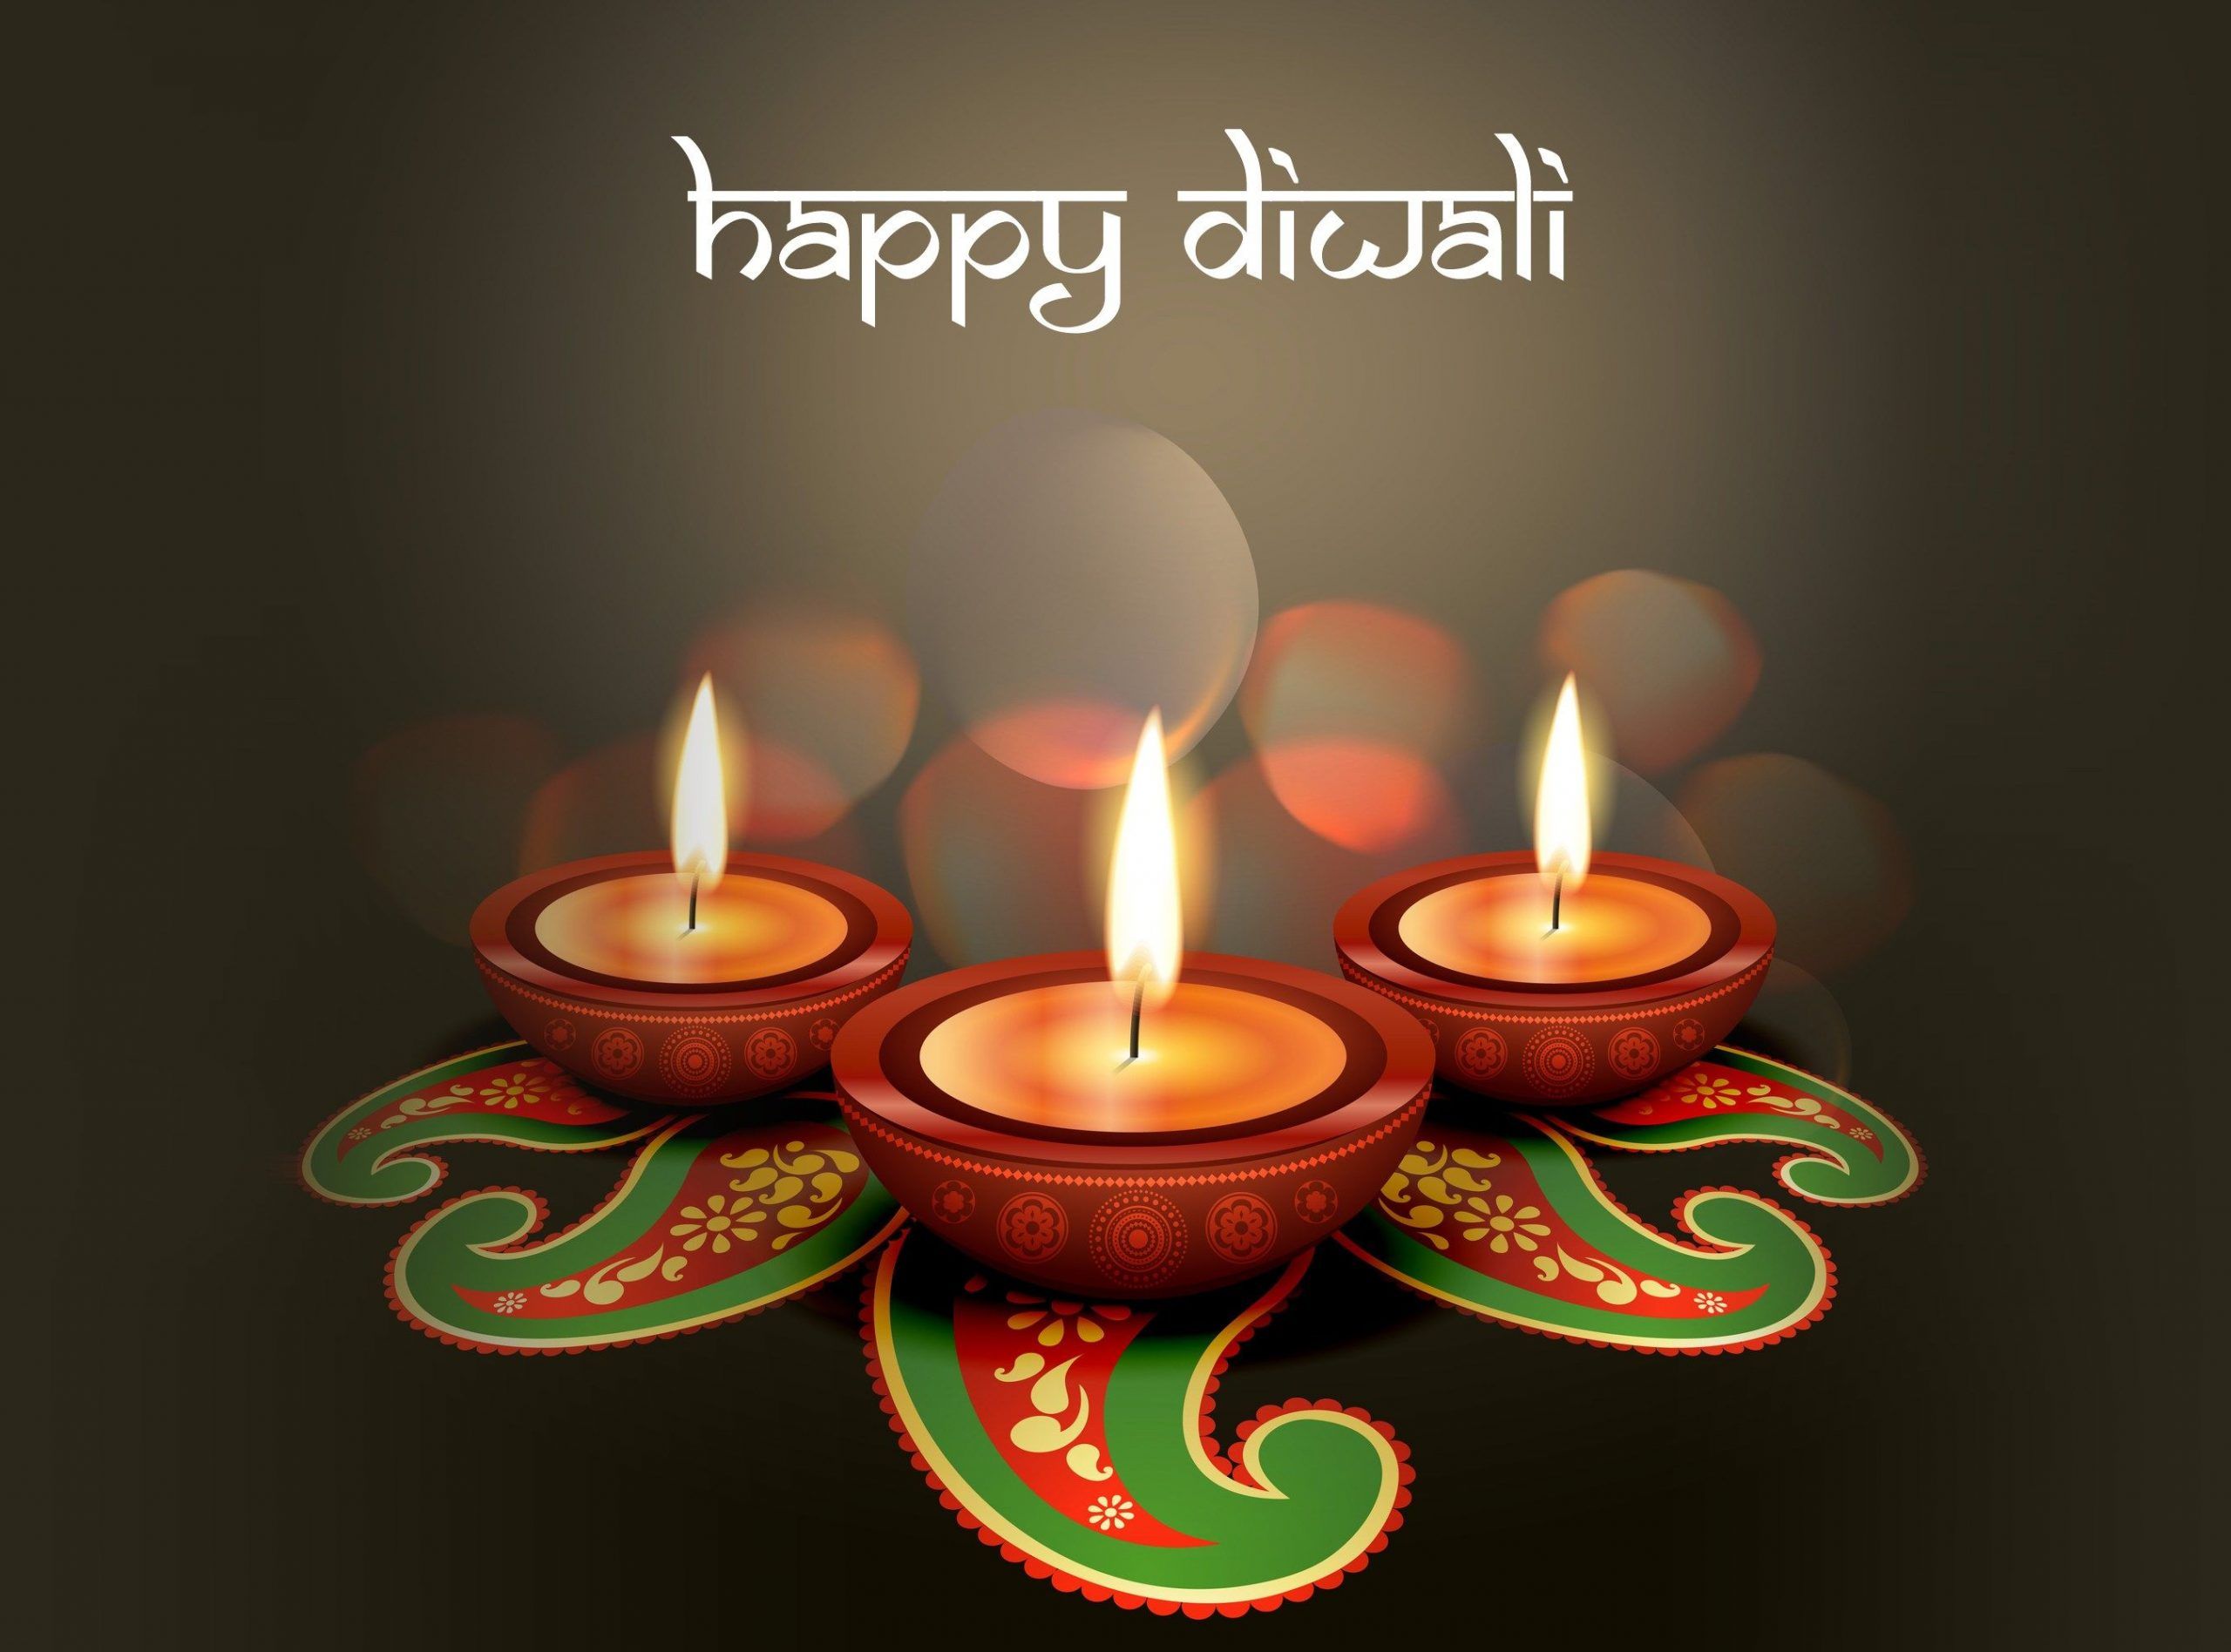  Happy Diwali Wishes Images for WhatsApp DP  Status  Picture Photo  Wallpapers Free Download